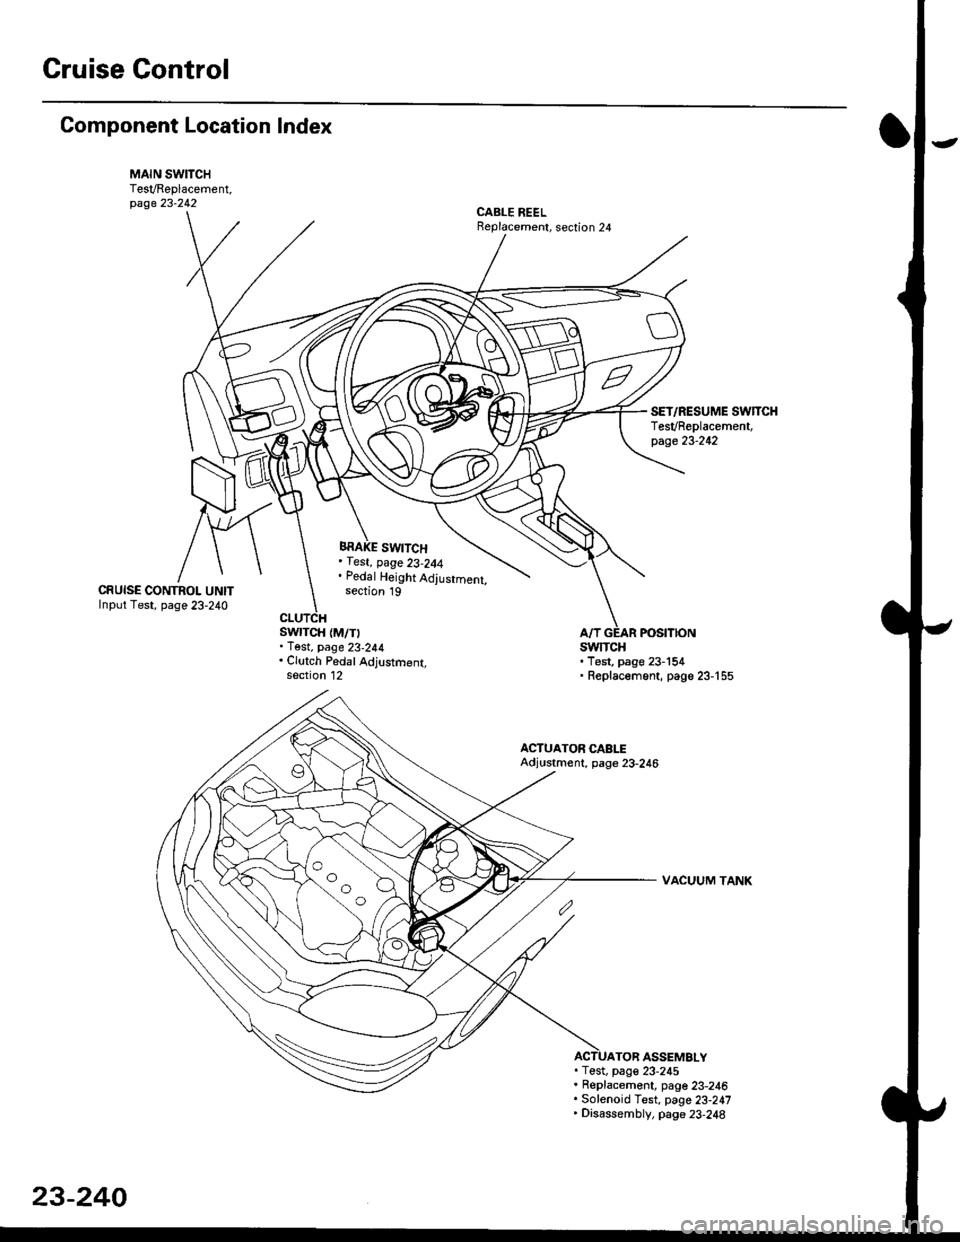 HONDA CIVIC 1999 6.G Workshop Manual Gruise Control
Component Location Index
MAIN SWITCHTesVReplacement,page 23-242CABLE REELReplacement, section 24
BRAKE SWITCH, fest, page 23-244. Pedal Height Adjustment,section 19CRUISE CONTROI. UNITI